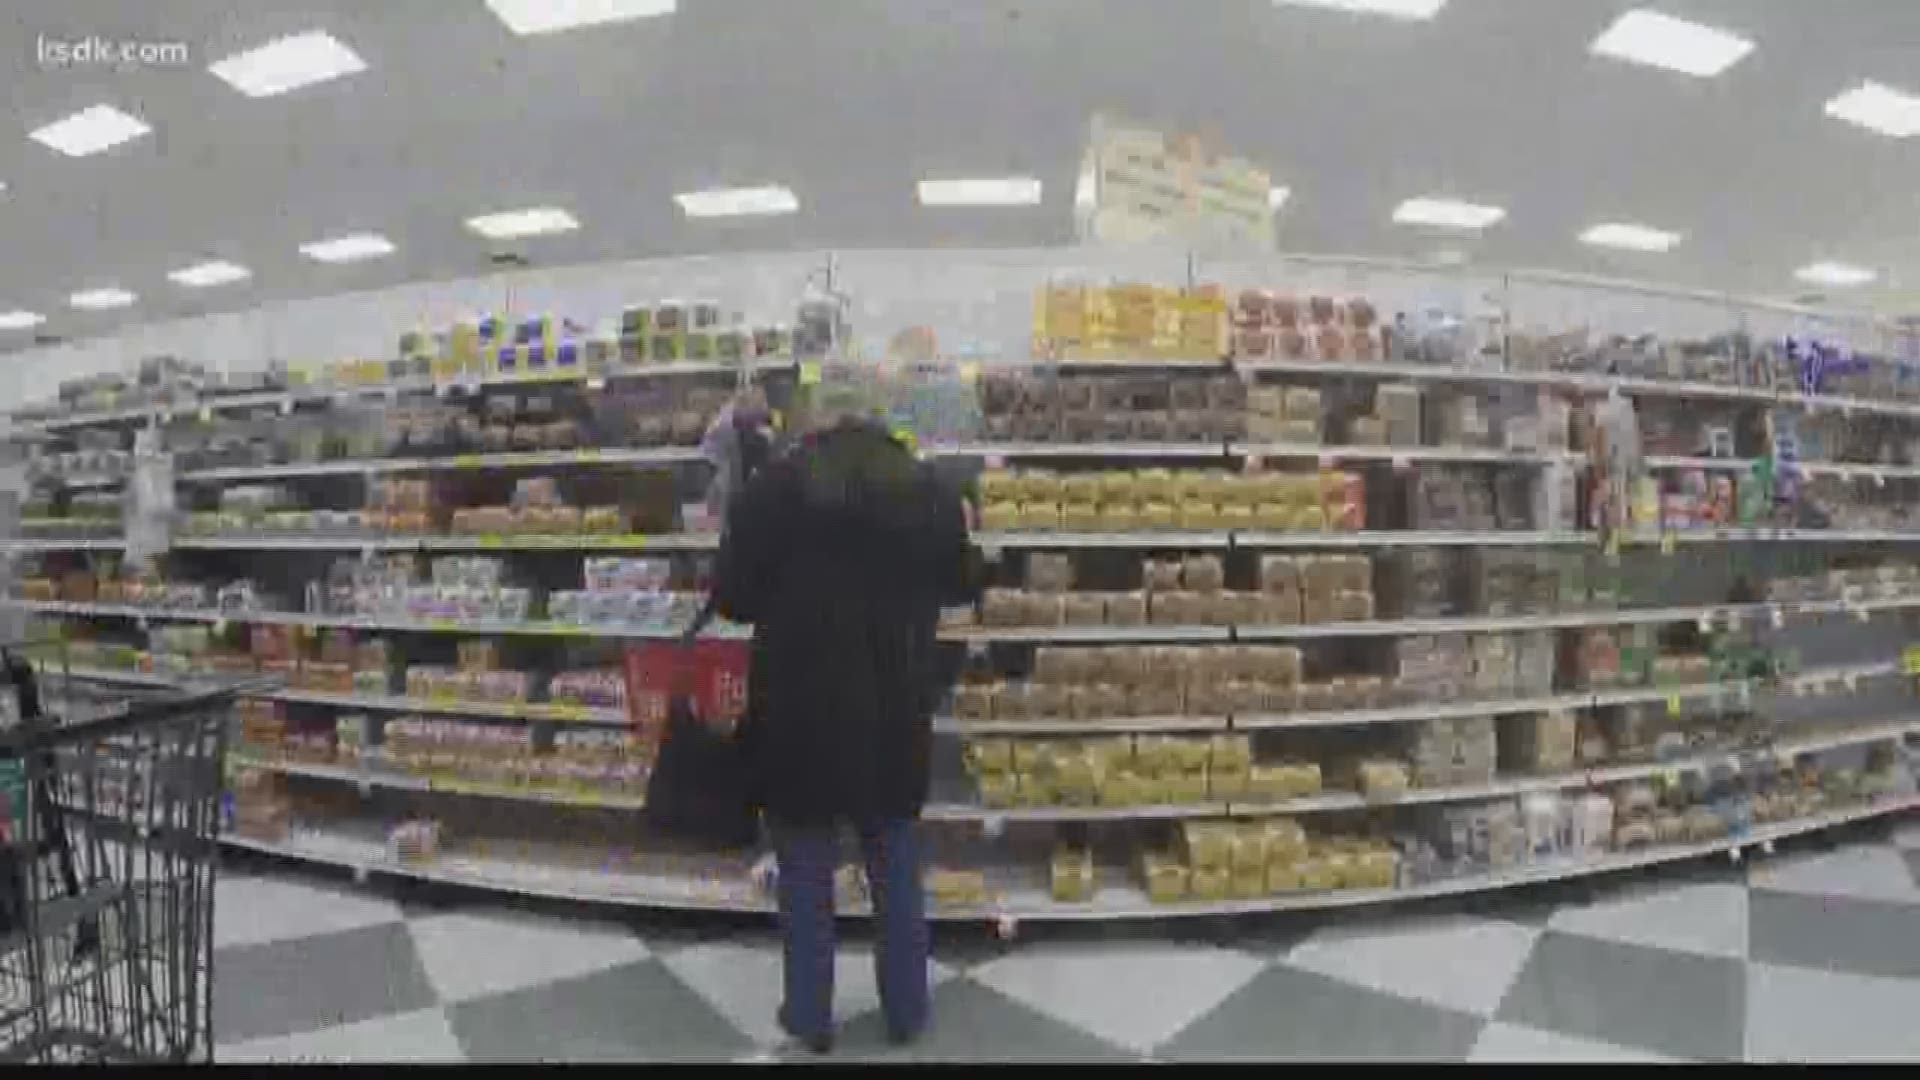 Check out this time lapse video of the bread disappearing.